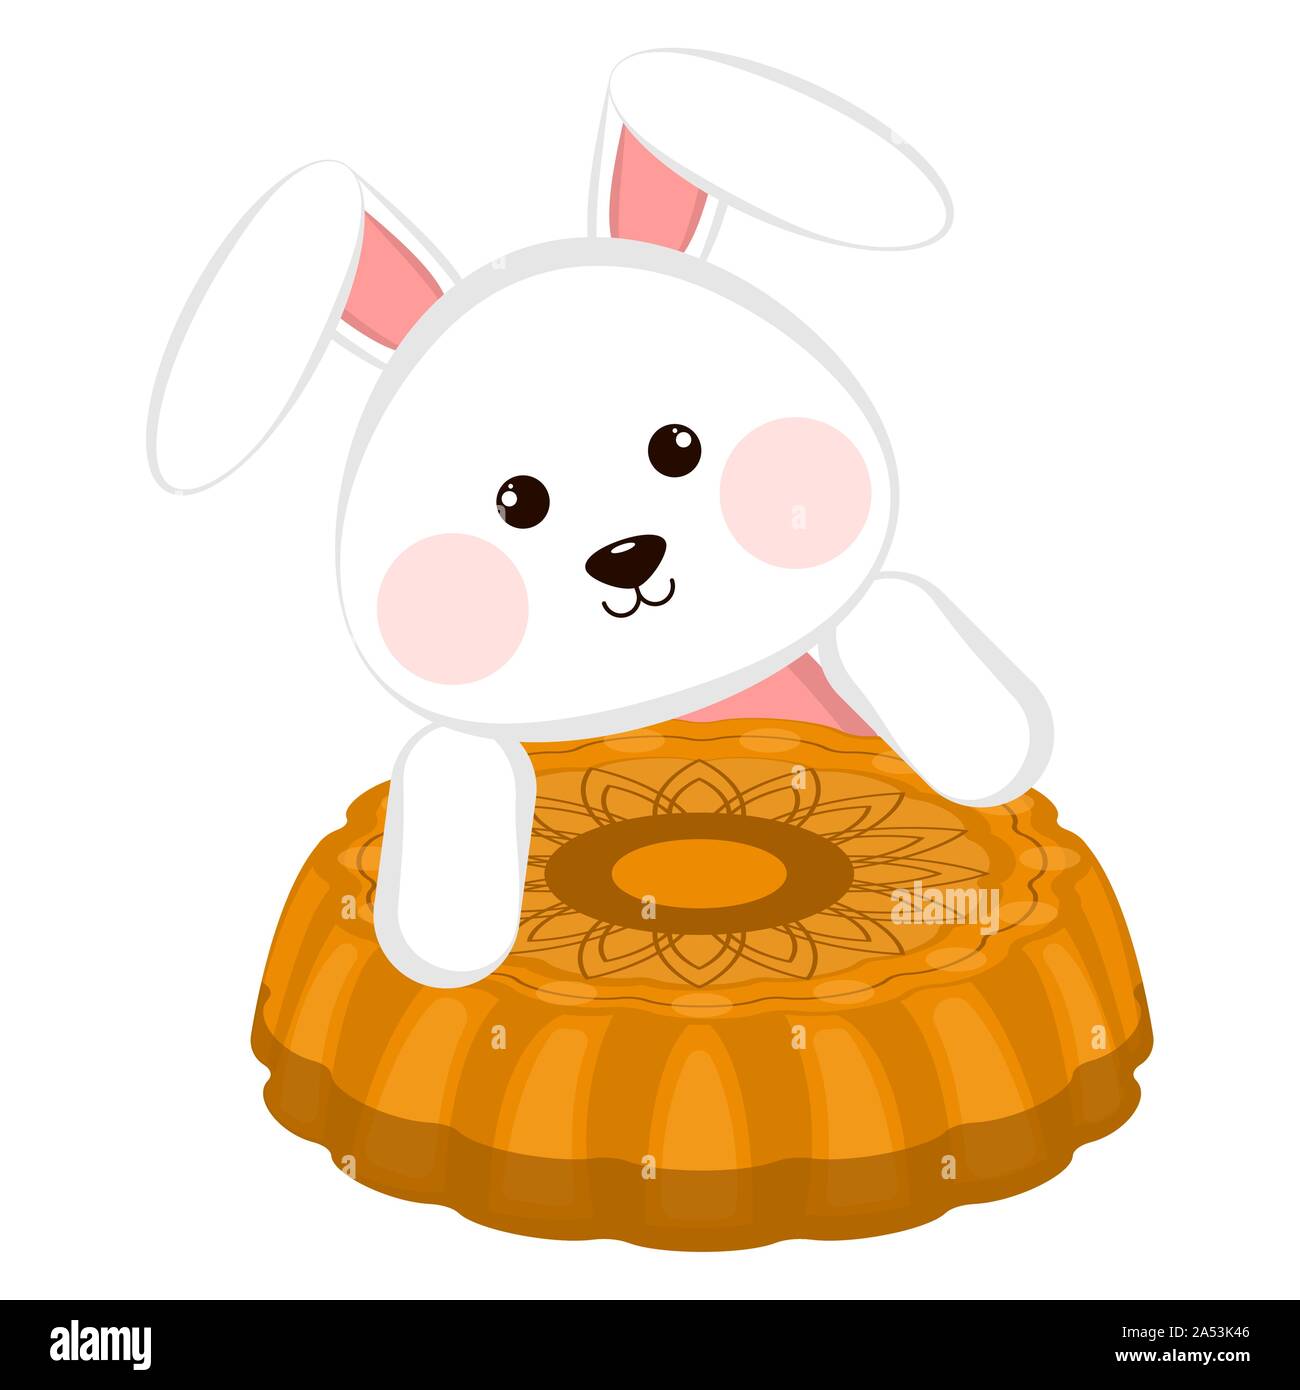 Honey bunny graphic Cut Out Stock Images & Pictures - Alamy